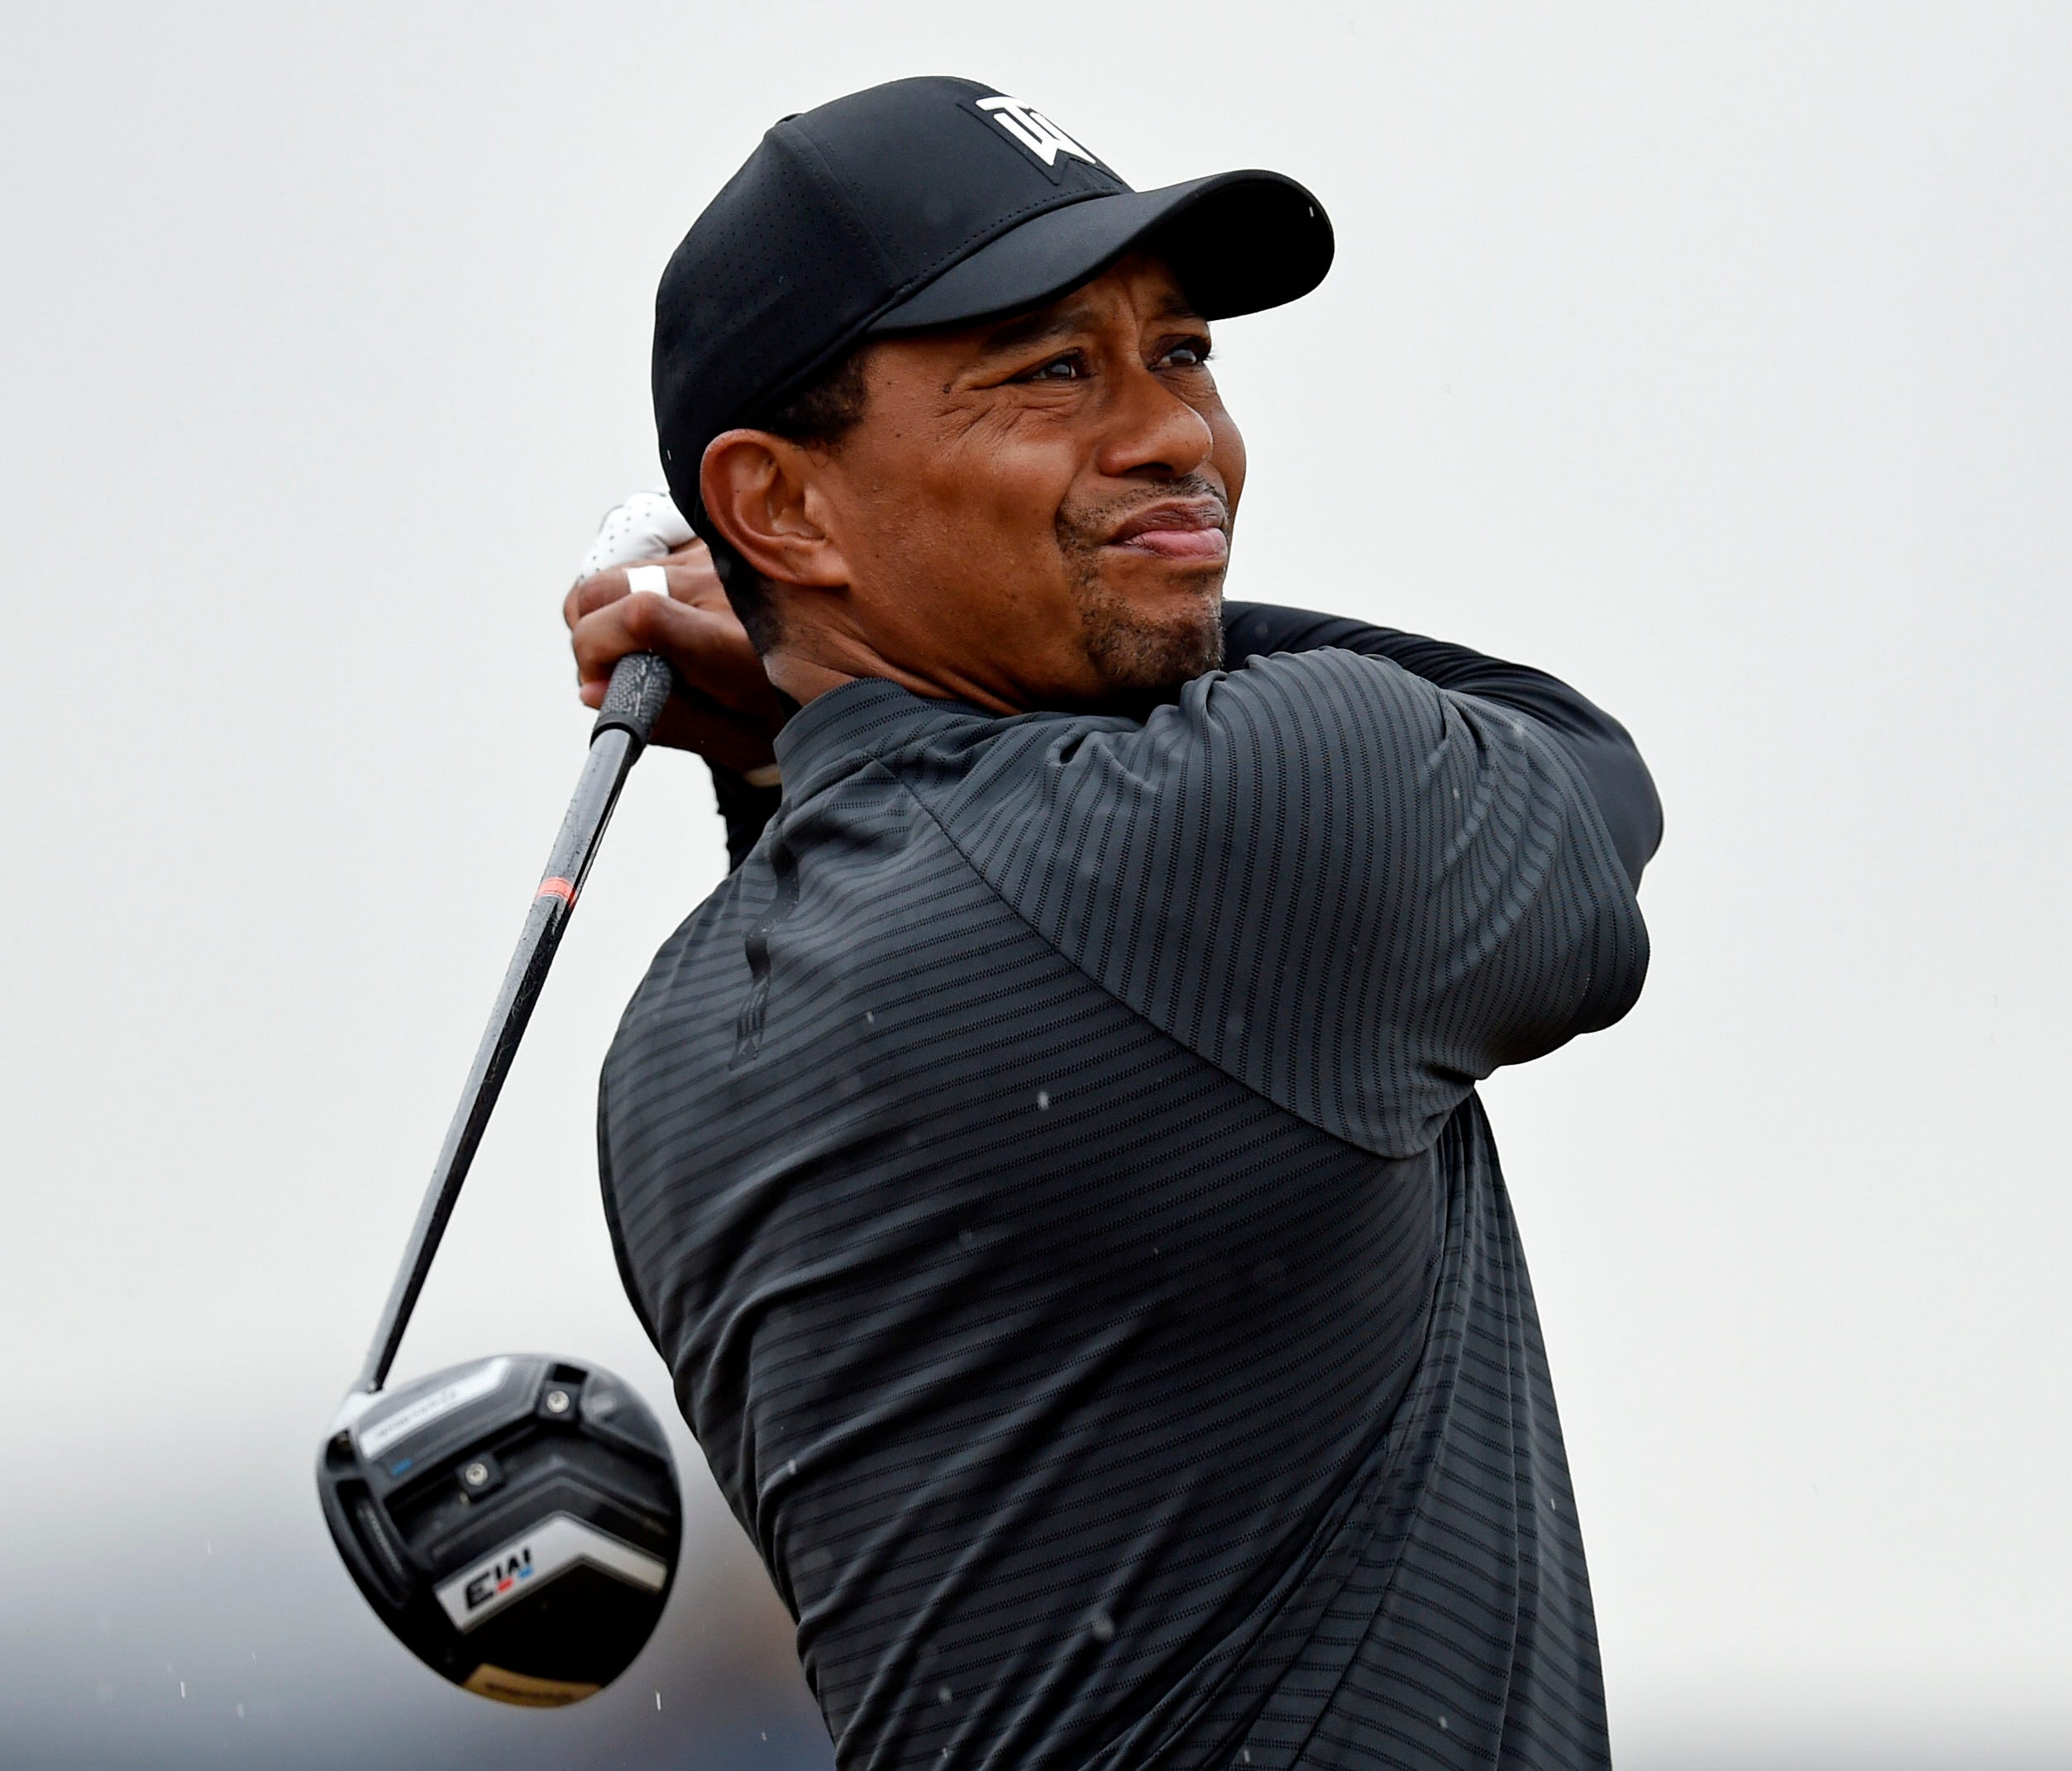 Tiger Woods plays his shot from the second tee during the second round of The Open Championship golf tournament at Carnoustie Golf Links.